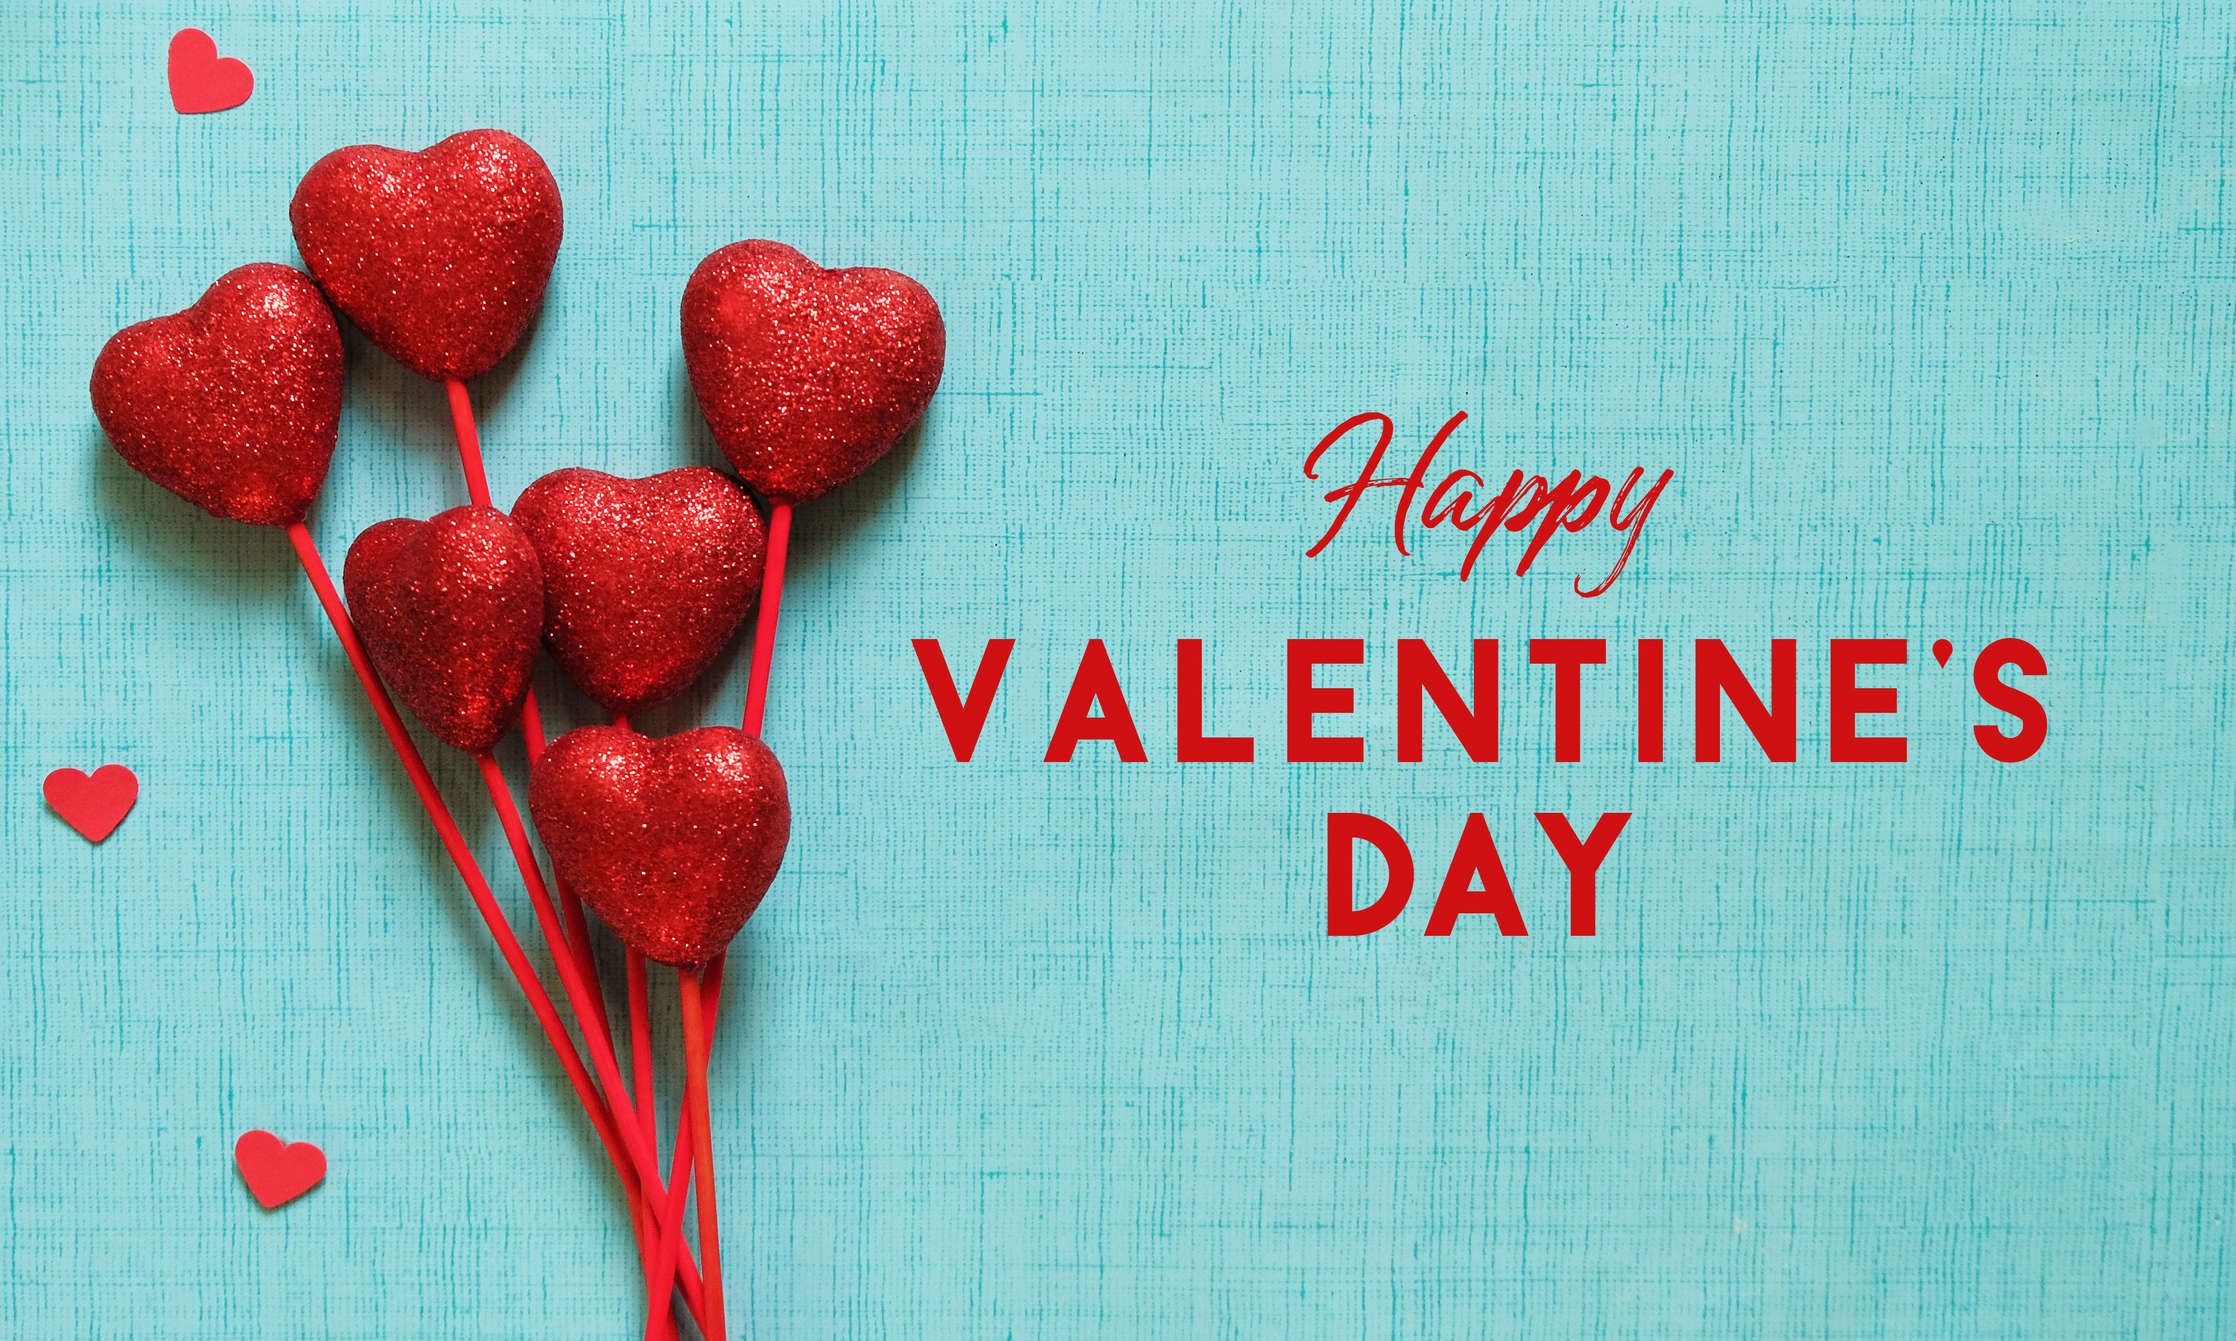 Happy Valentines Day 2020: Image, Quotes, Wishes, Messages, Cards, Greetings, Picture and GIFs of India